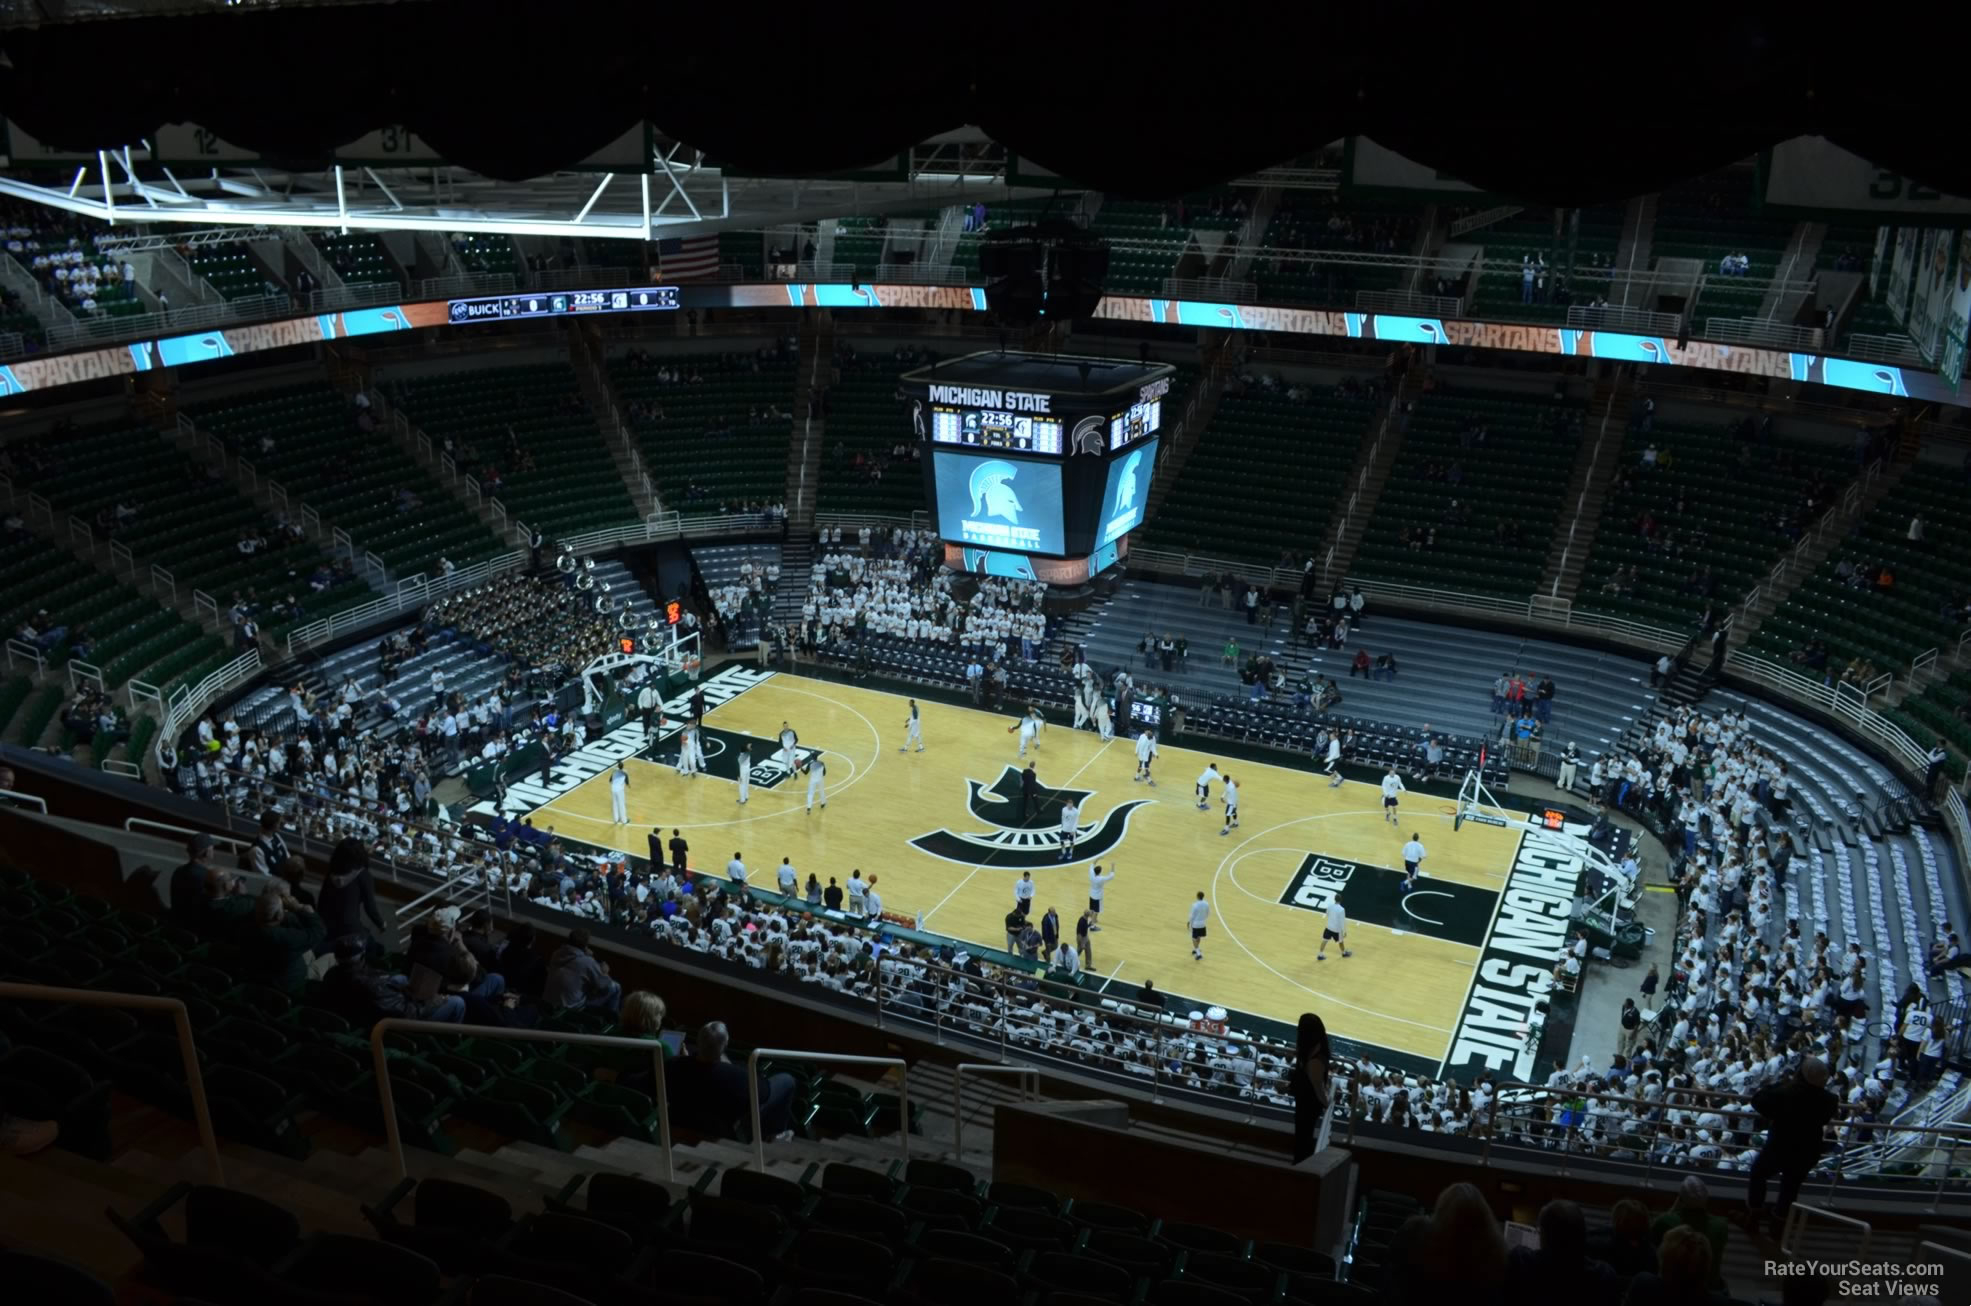 section 207, row 15 seat view  - breslin center